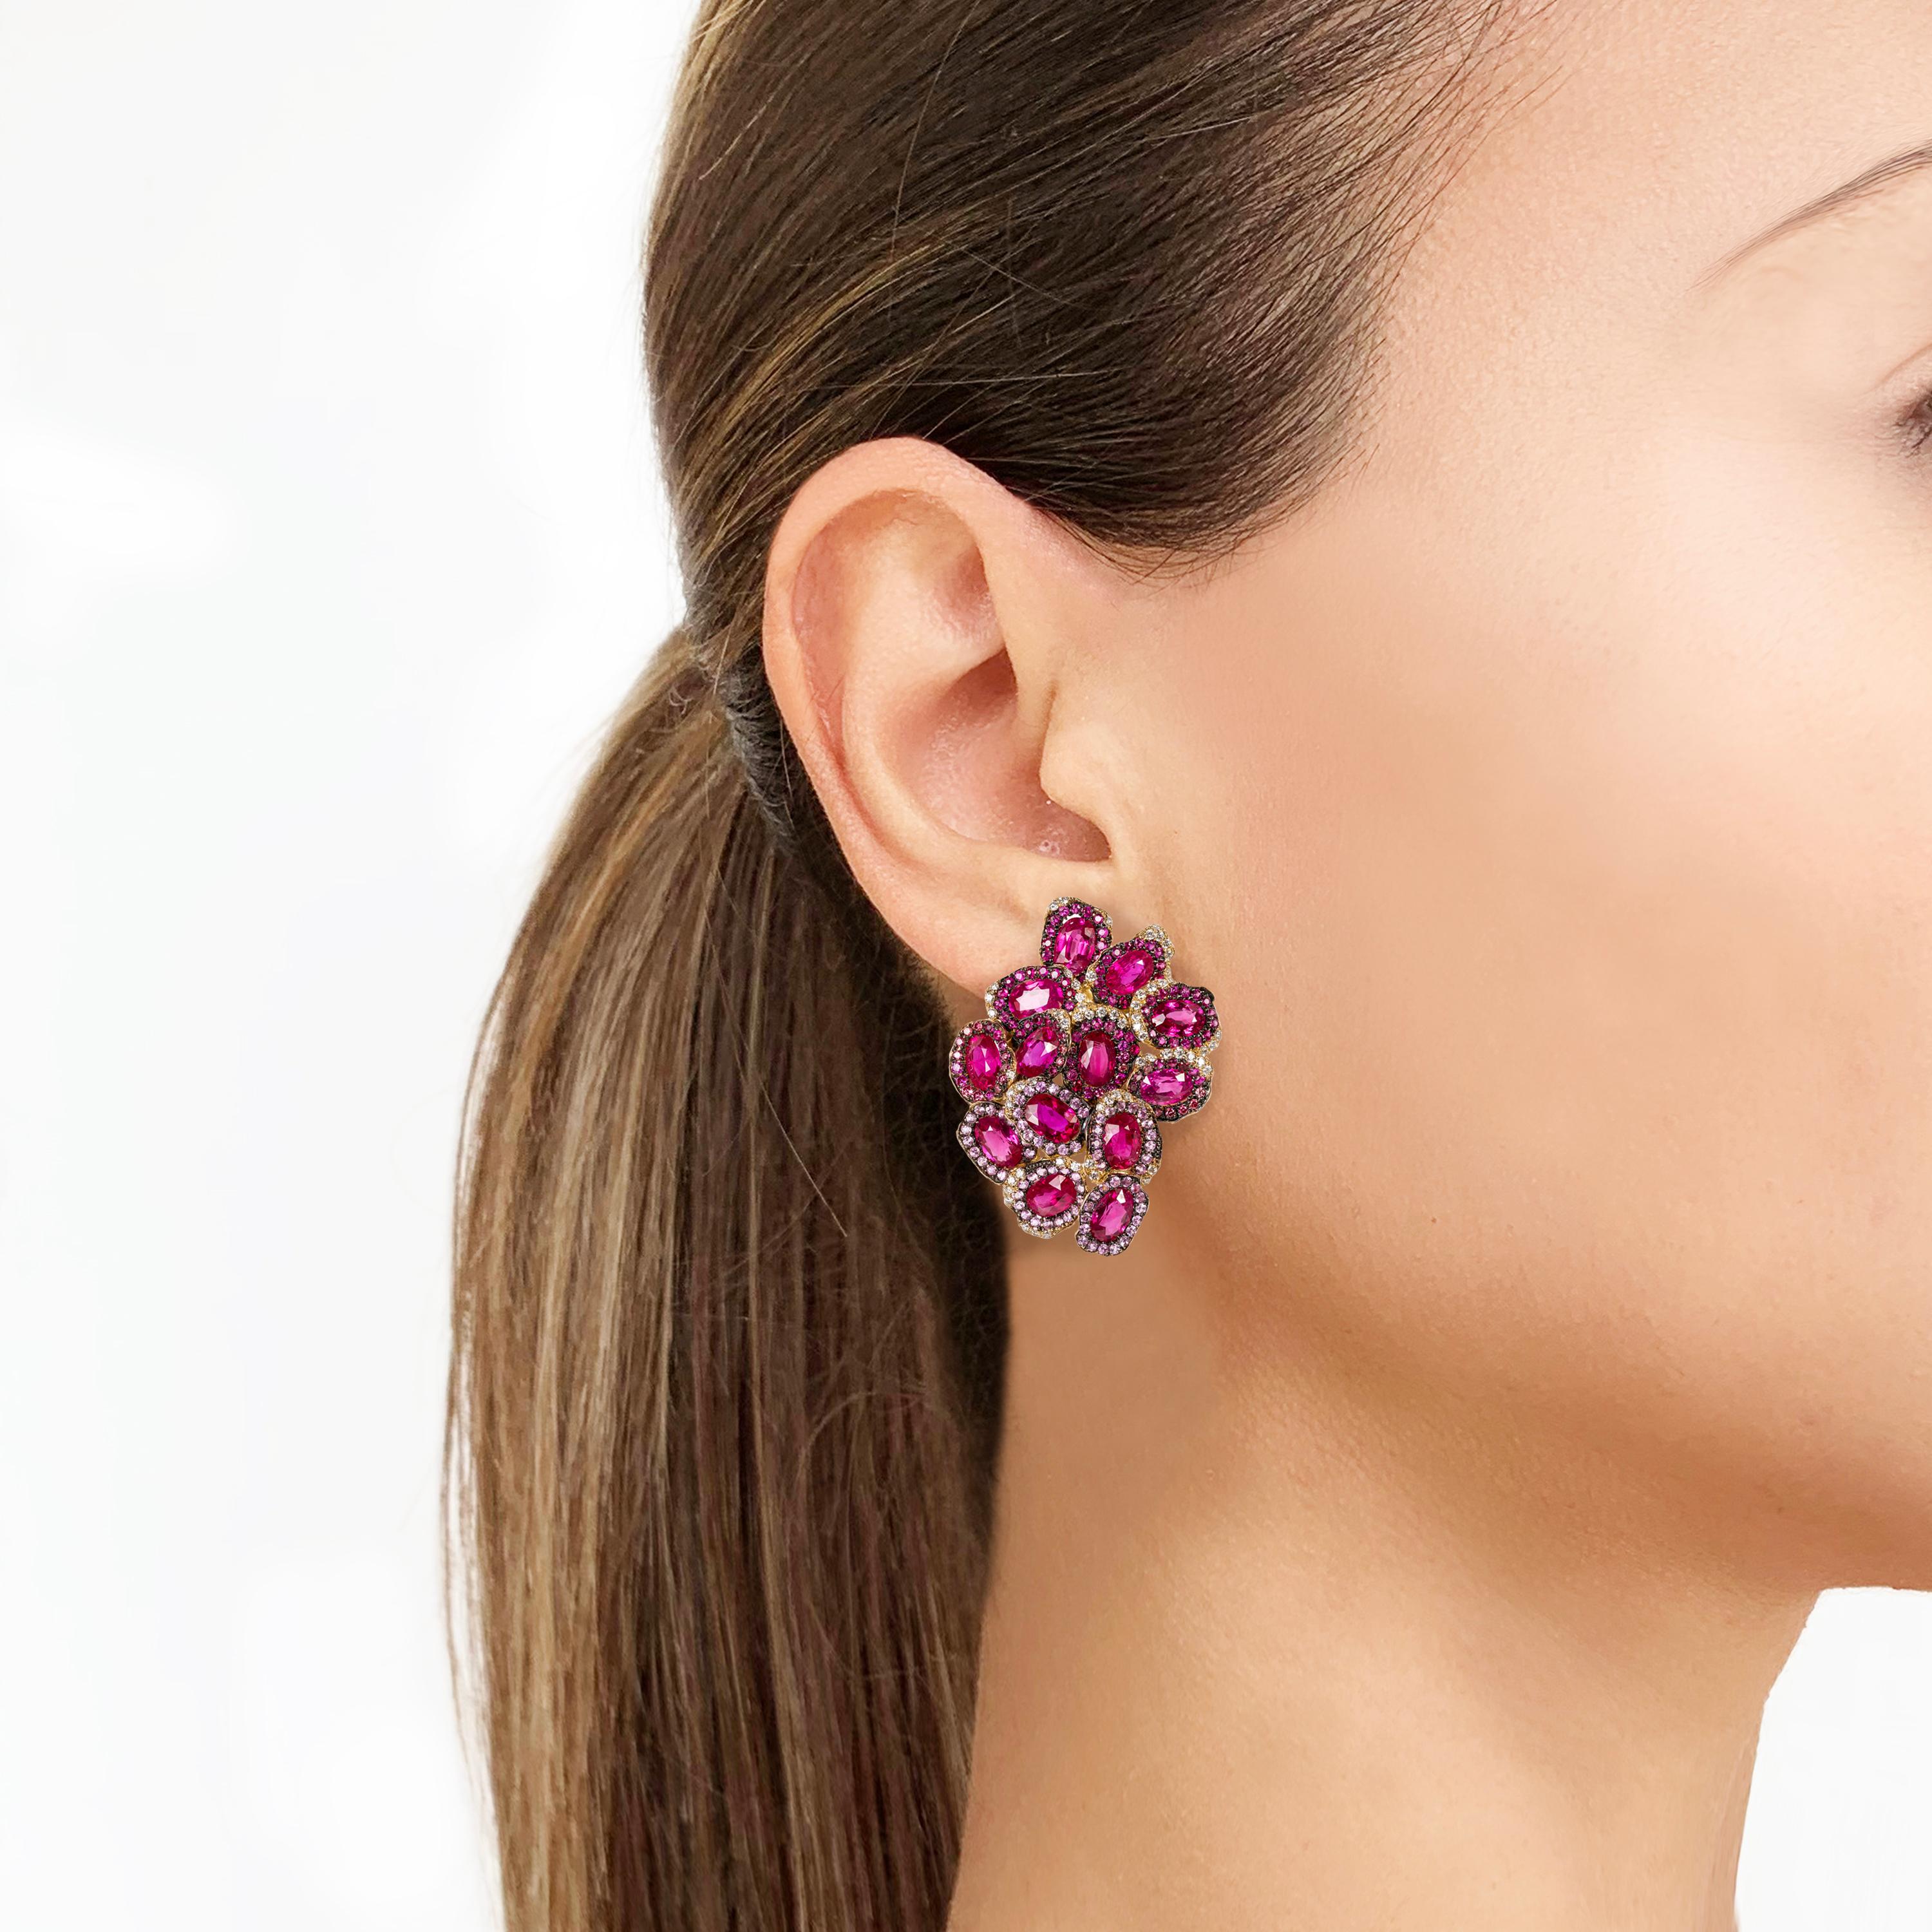 Rosior by Manuel Rosas Contemporary Drop Earrings manufactured in Yellow Gold and set with:
- 26 Oval cut Rubies with 16 ct;
- 134 Round Cut Rubies with 1,04 ct;
- 146 Pink Sapphires with 1,16 ct;
- 73 Pink Diamonds with 0,44 ct;
- 131 White